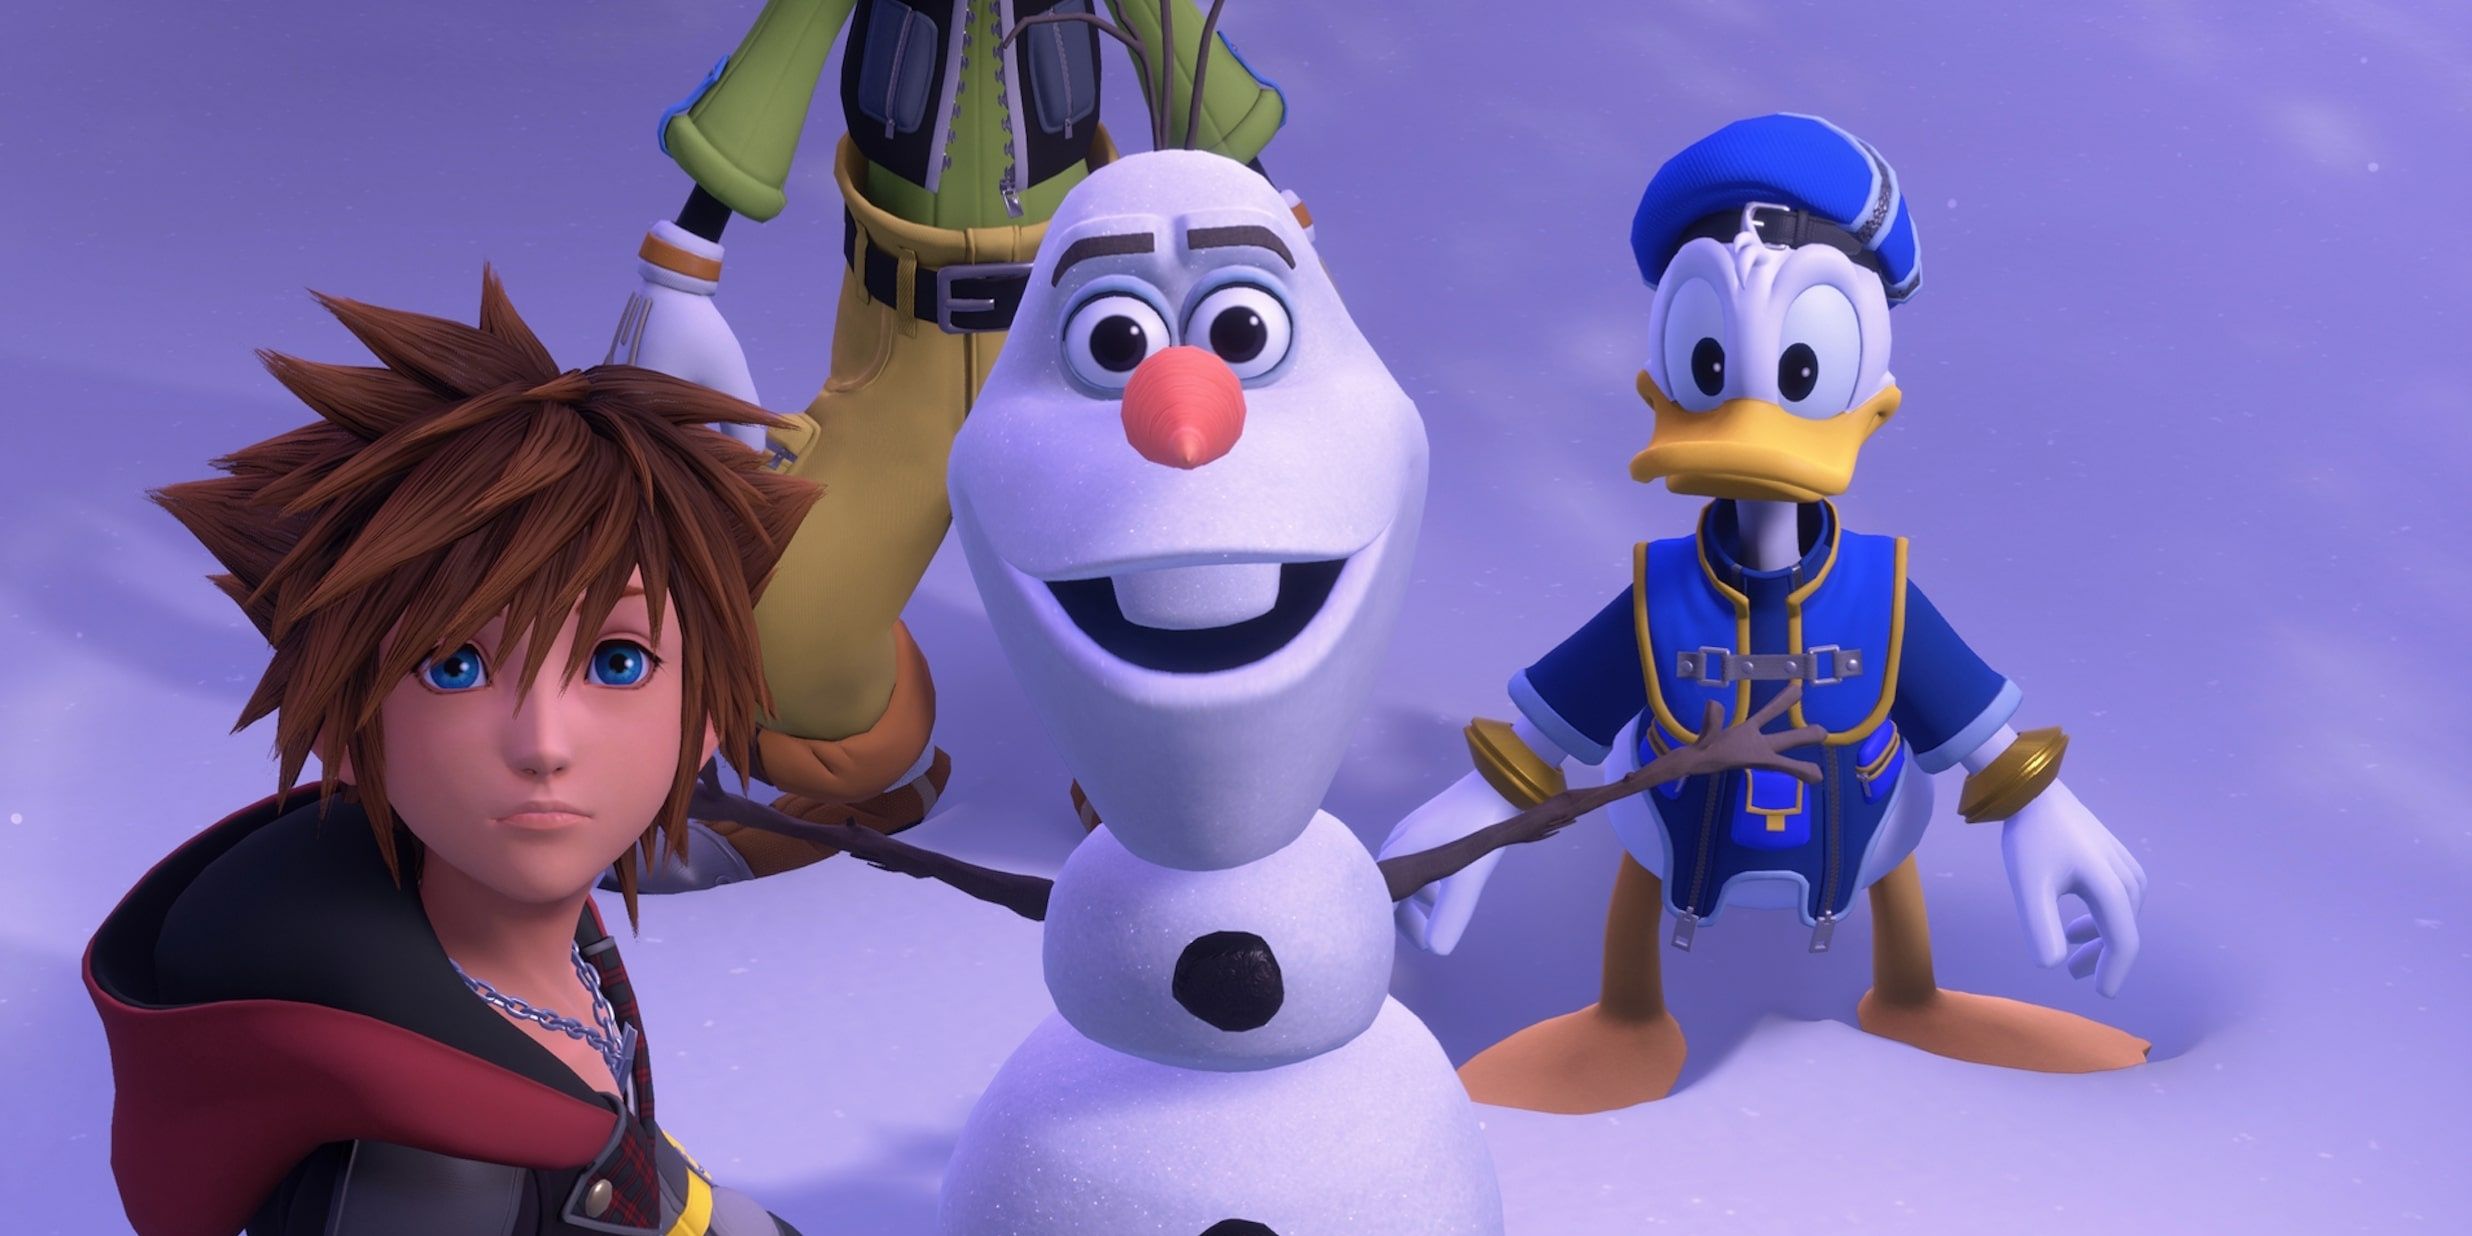 Kingdom Hearts 3' Is A Technical Disappointment On The Xbox One And PS4  Consoles